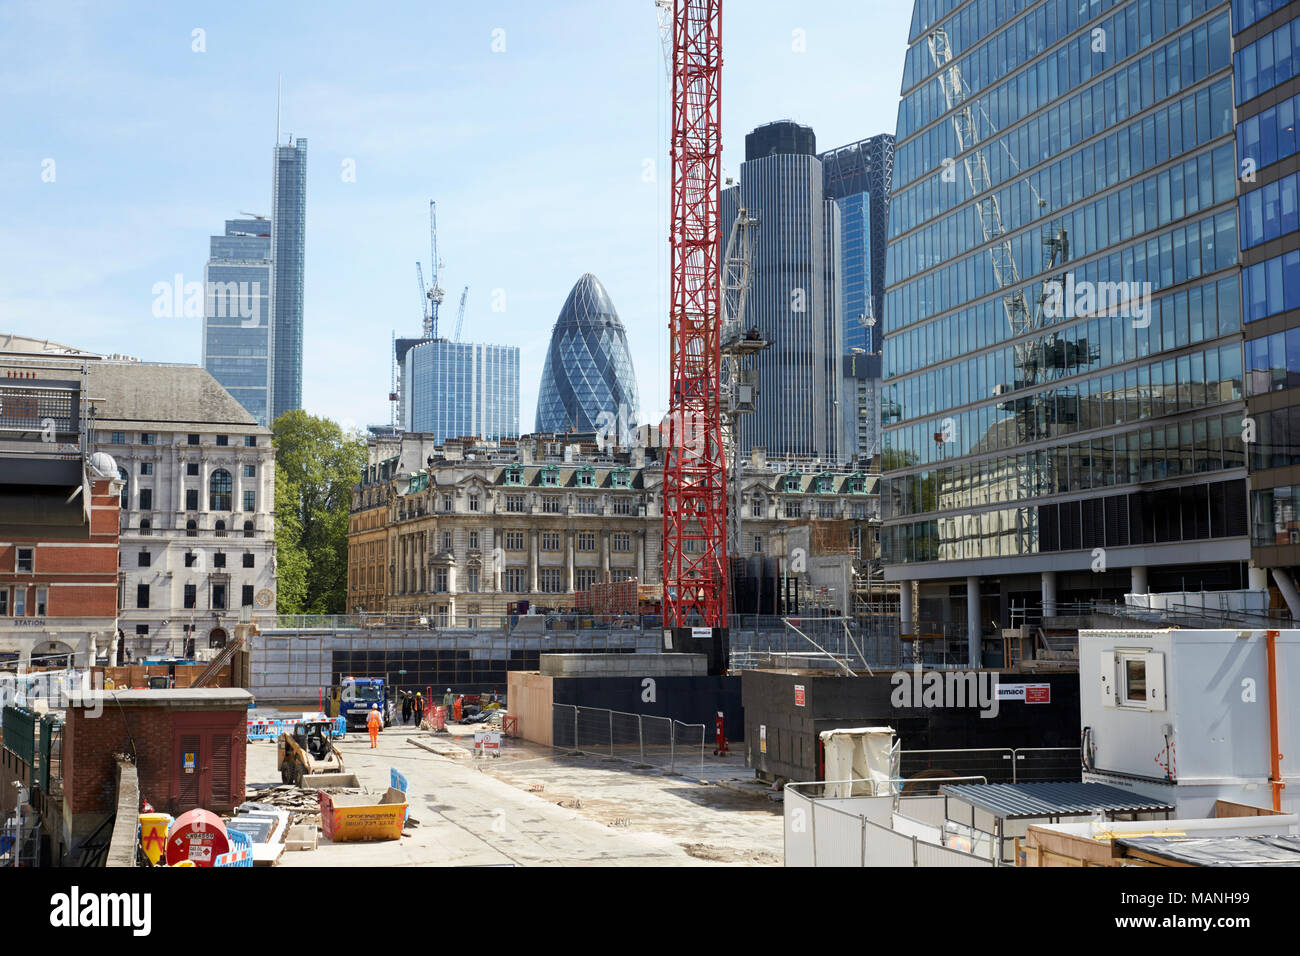 LONDON - MAY, 2017: Construction site in the heart of the City Of London, London Stock Photo